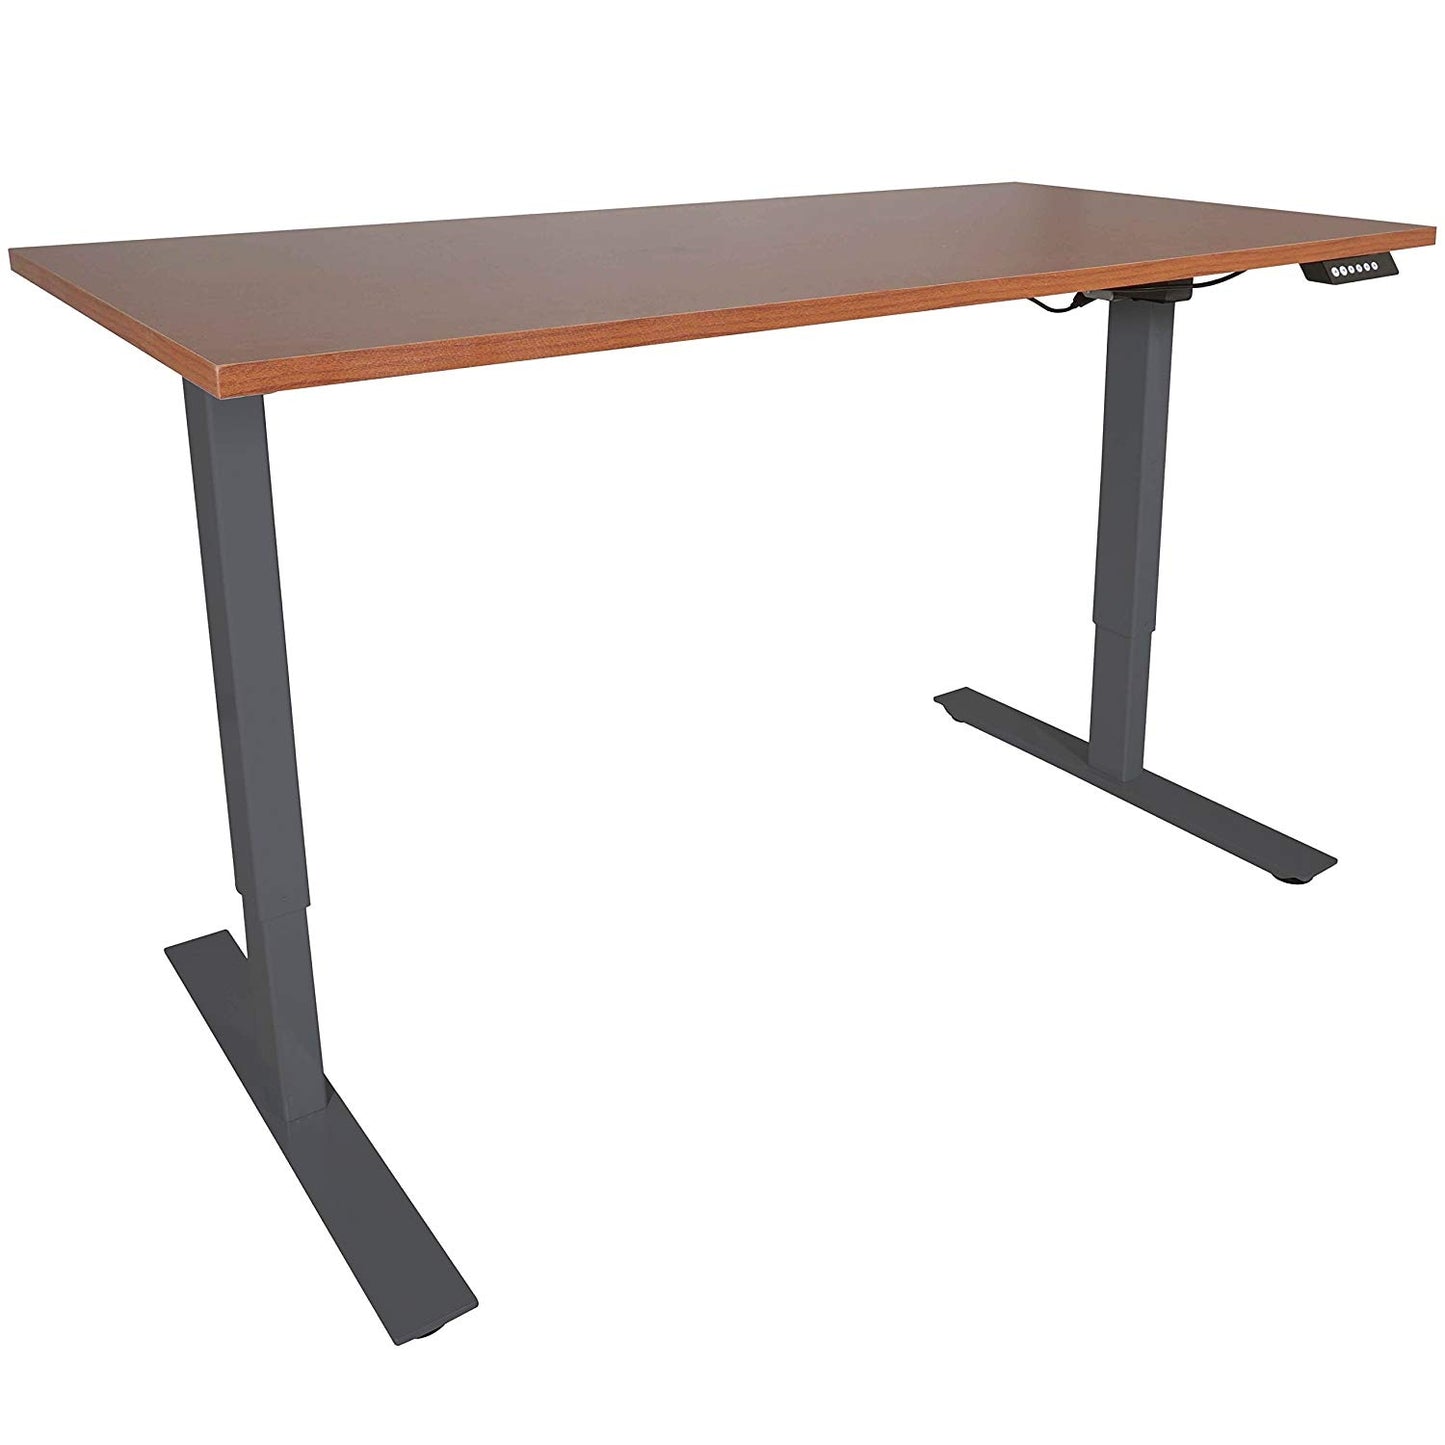 A2 Single Motor Sit To Stand Desk W/ Wood 30" X 48" Top - view 1